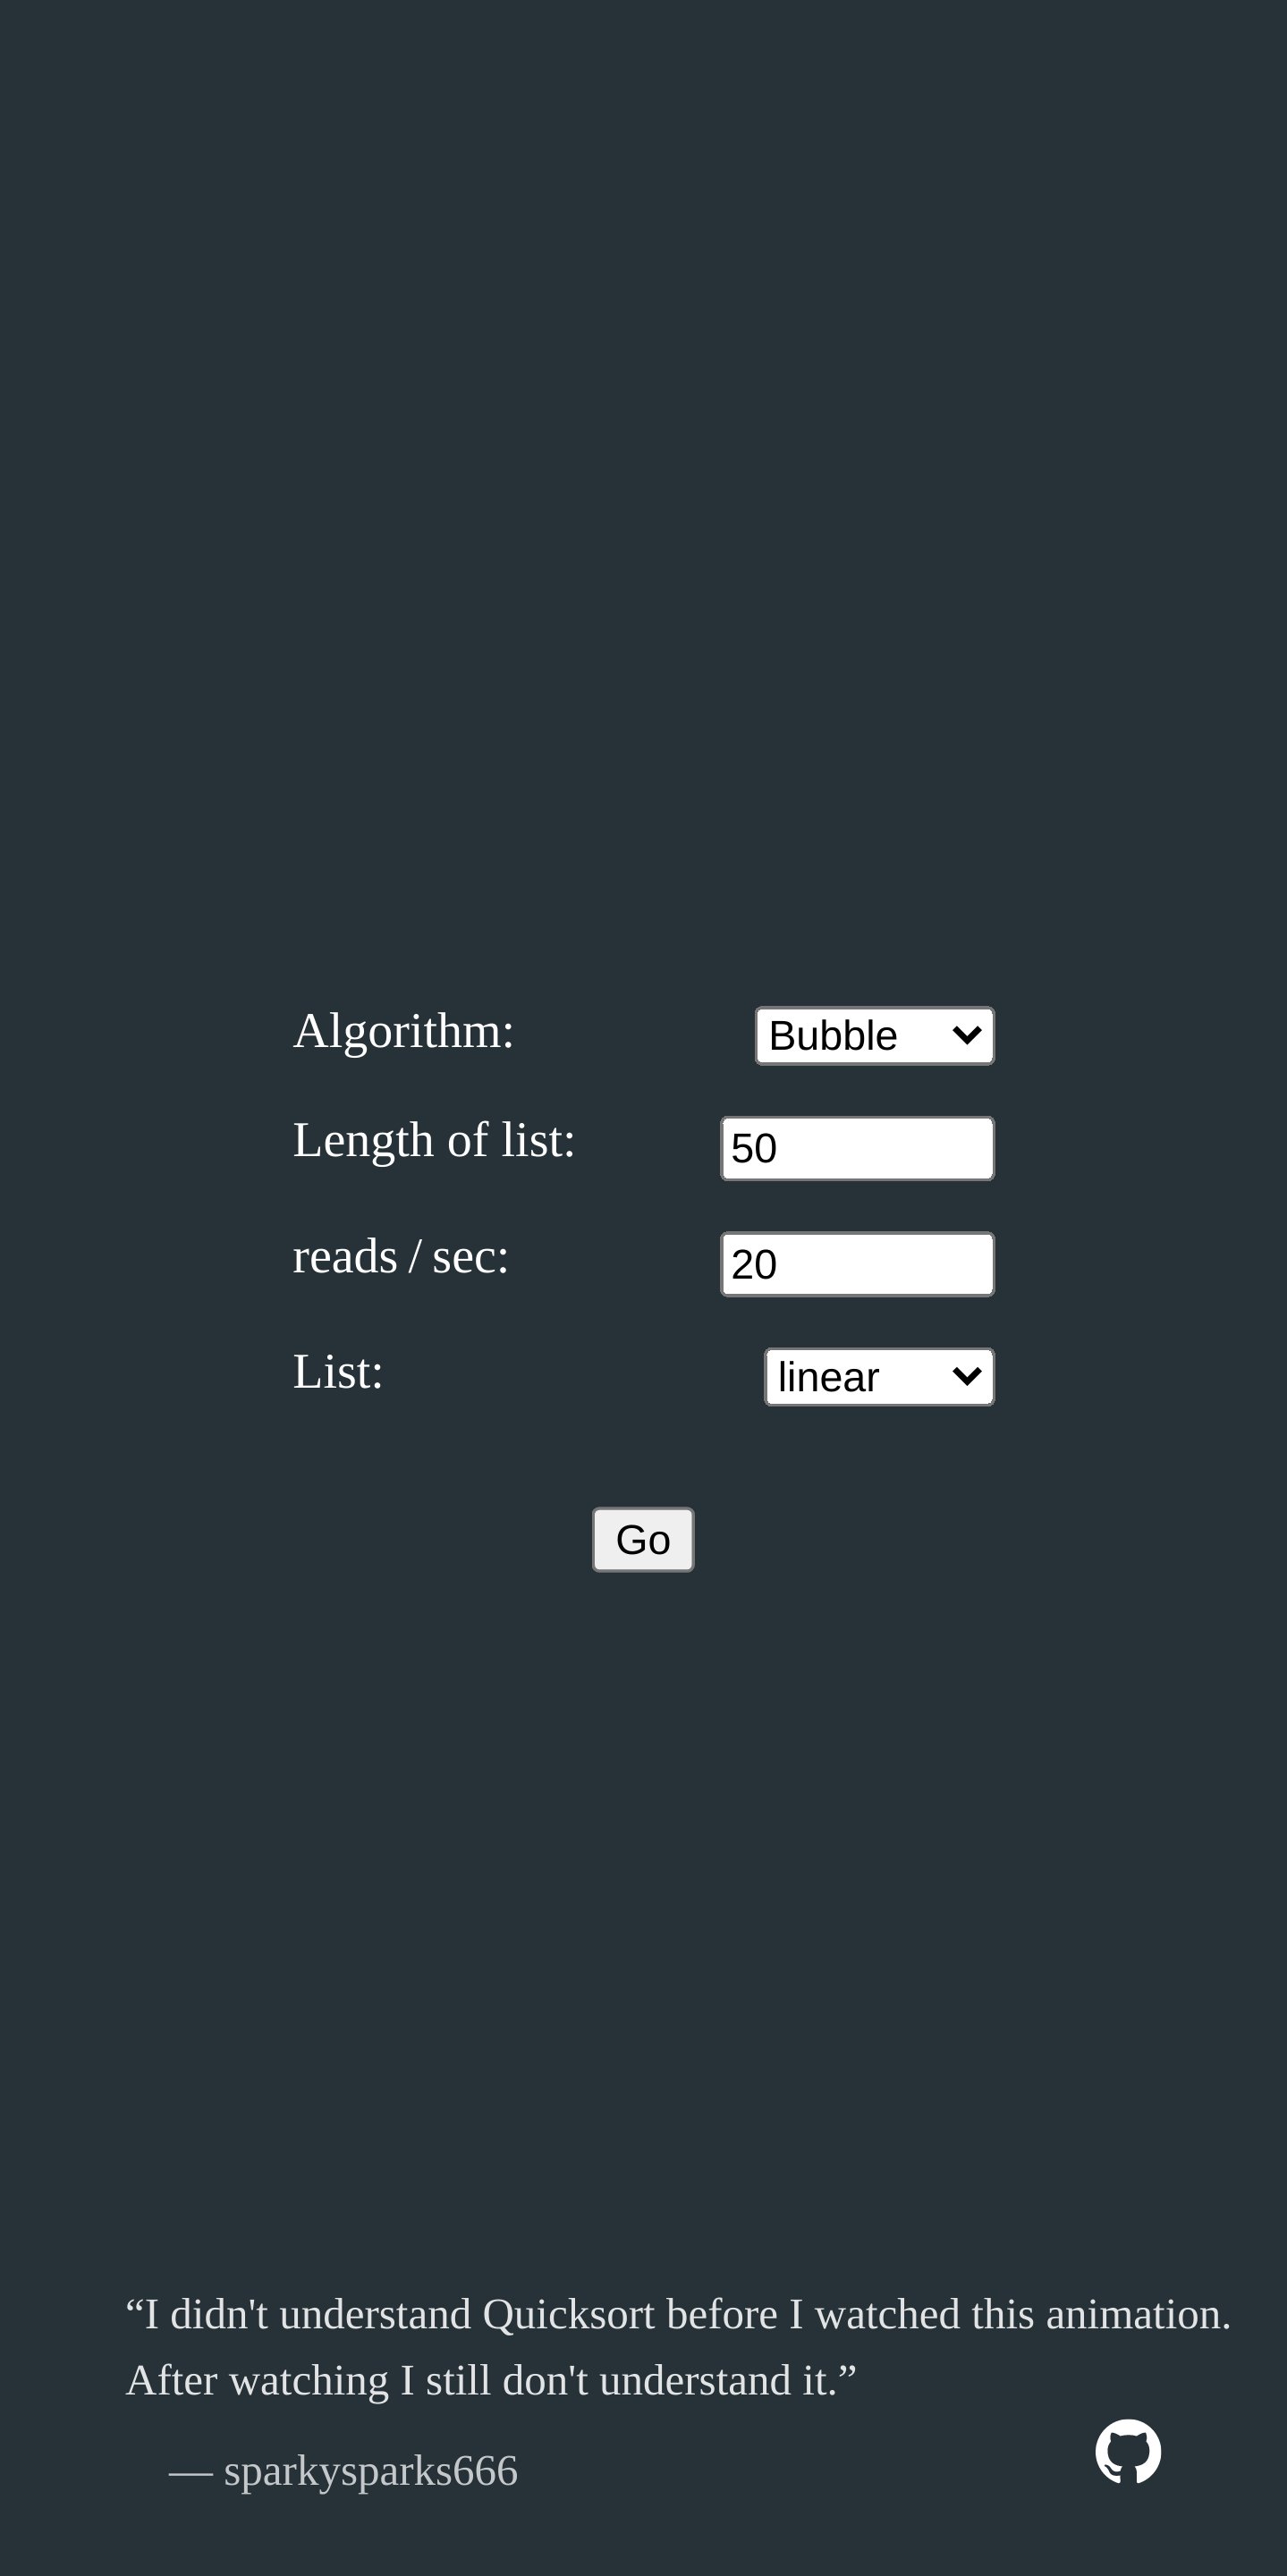 Show HN: A website where you can watch and listen to sorting algorithms